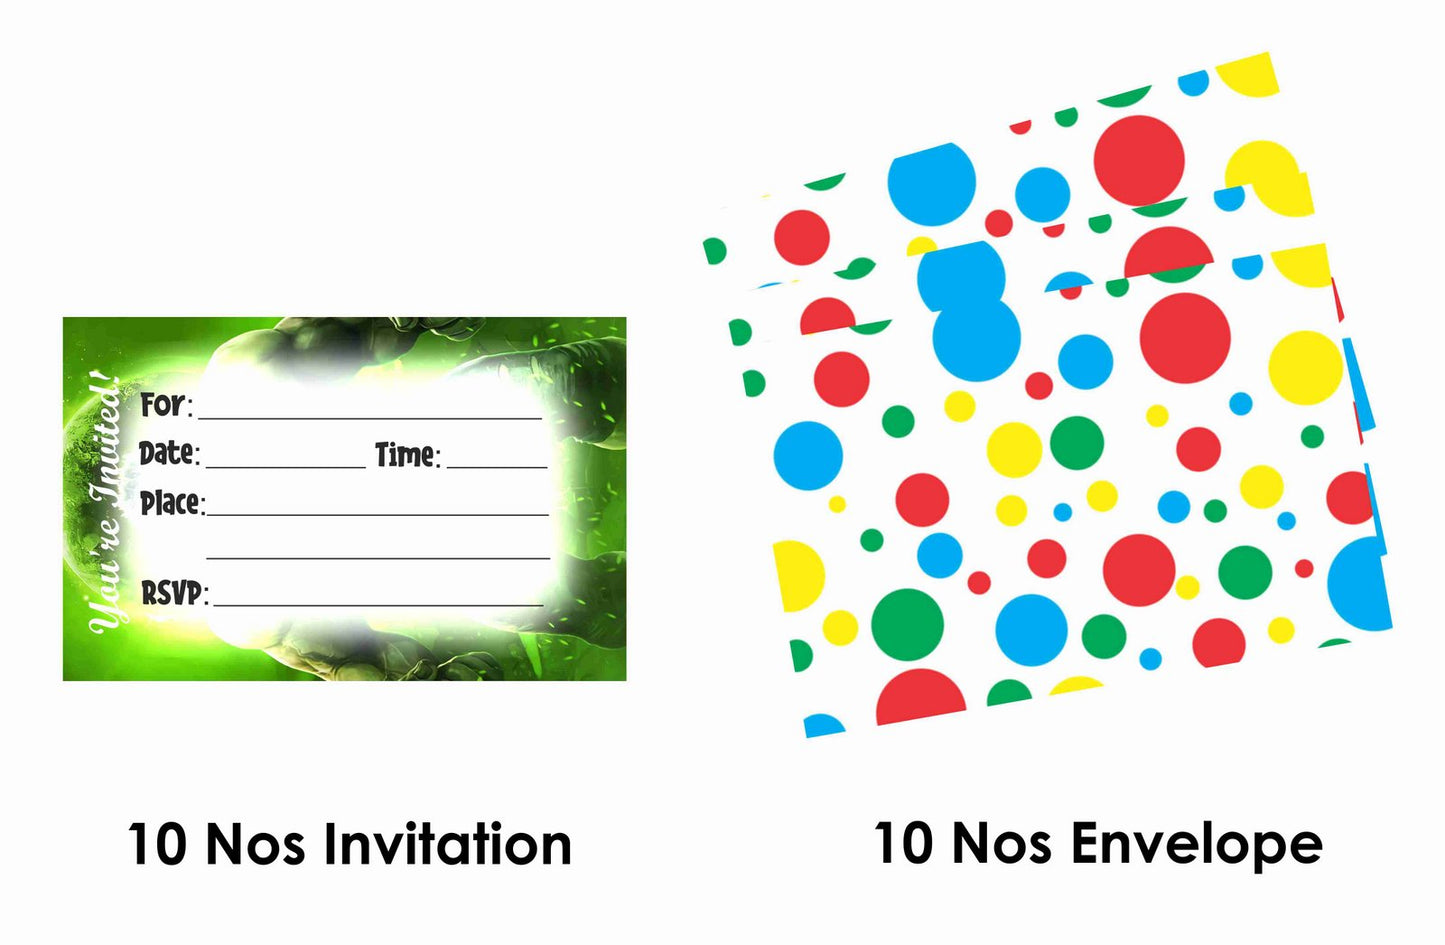 Hulk Theme Children's Birthday Party Invitations Cards with Envelopes - Kids Birthday Party Invitations for Boys or Girls,- Invitation Cards (Pack of 10)